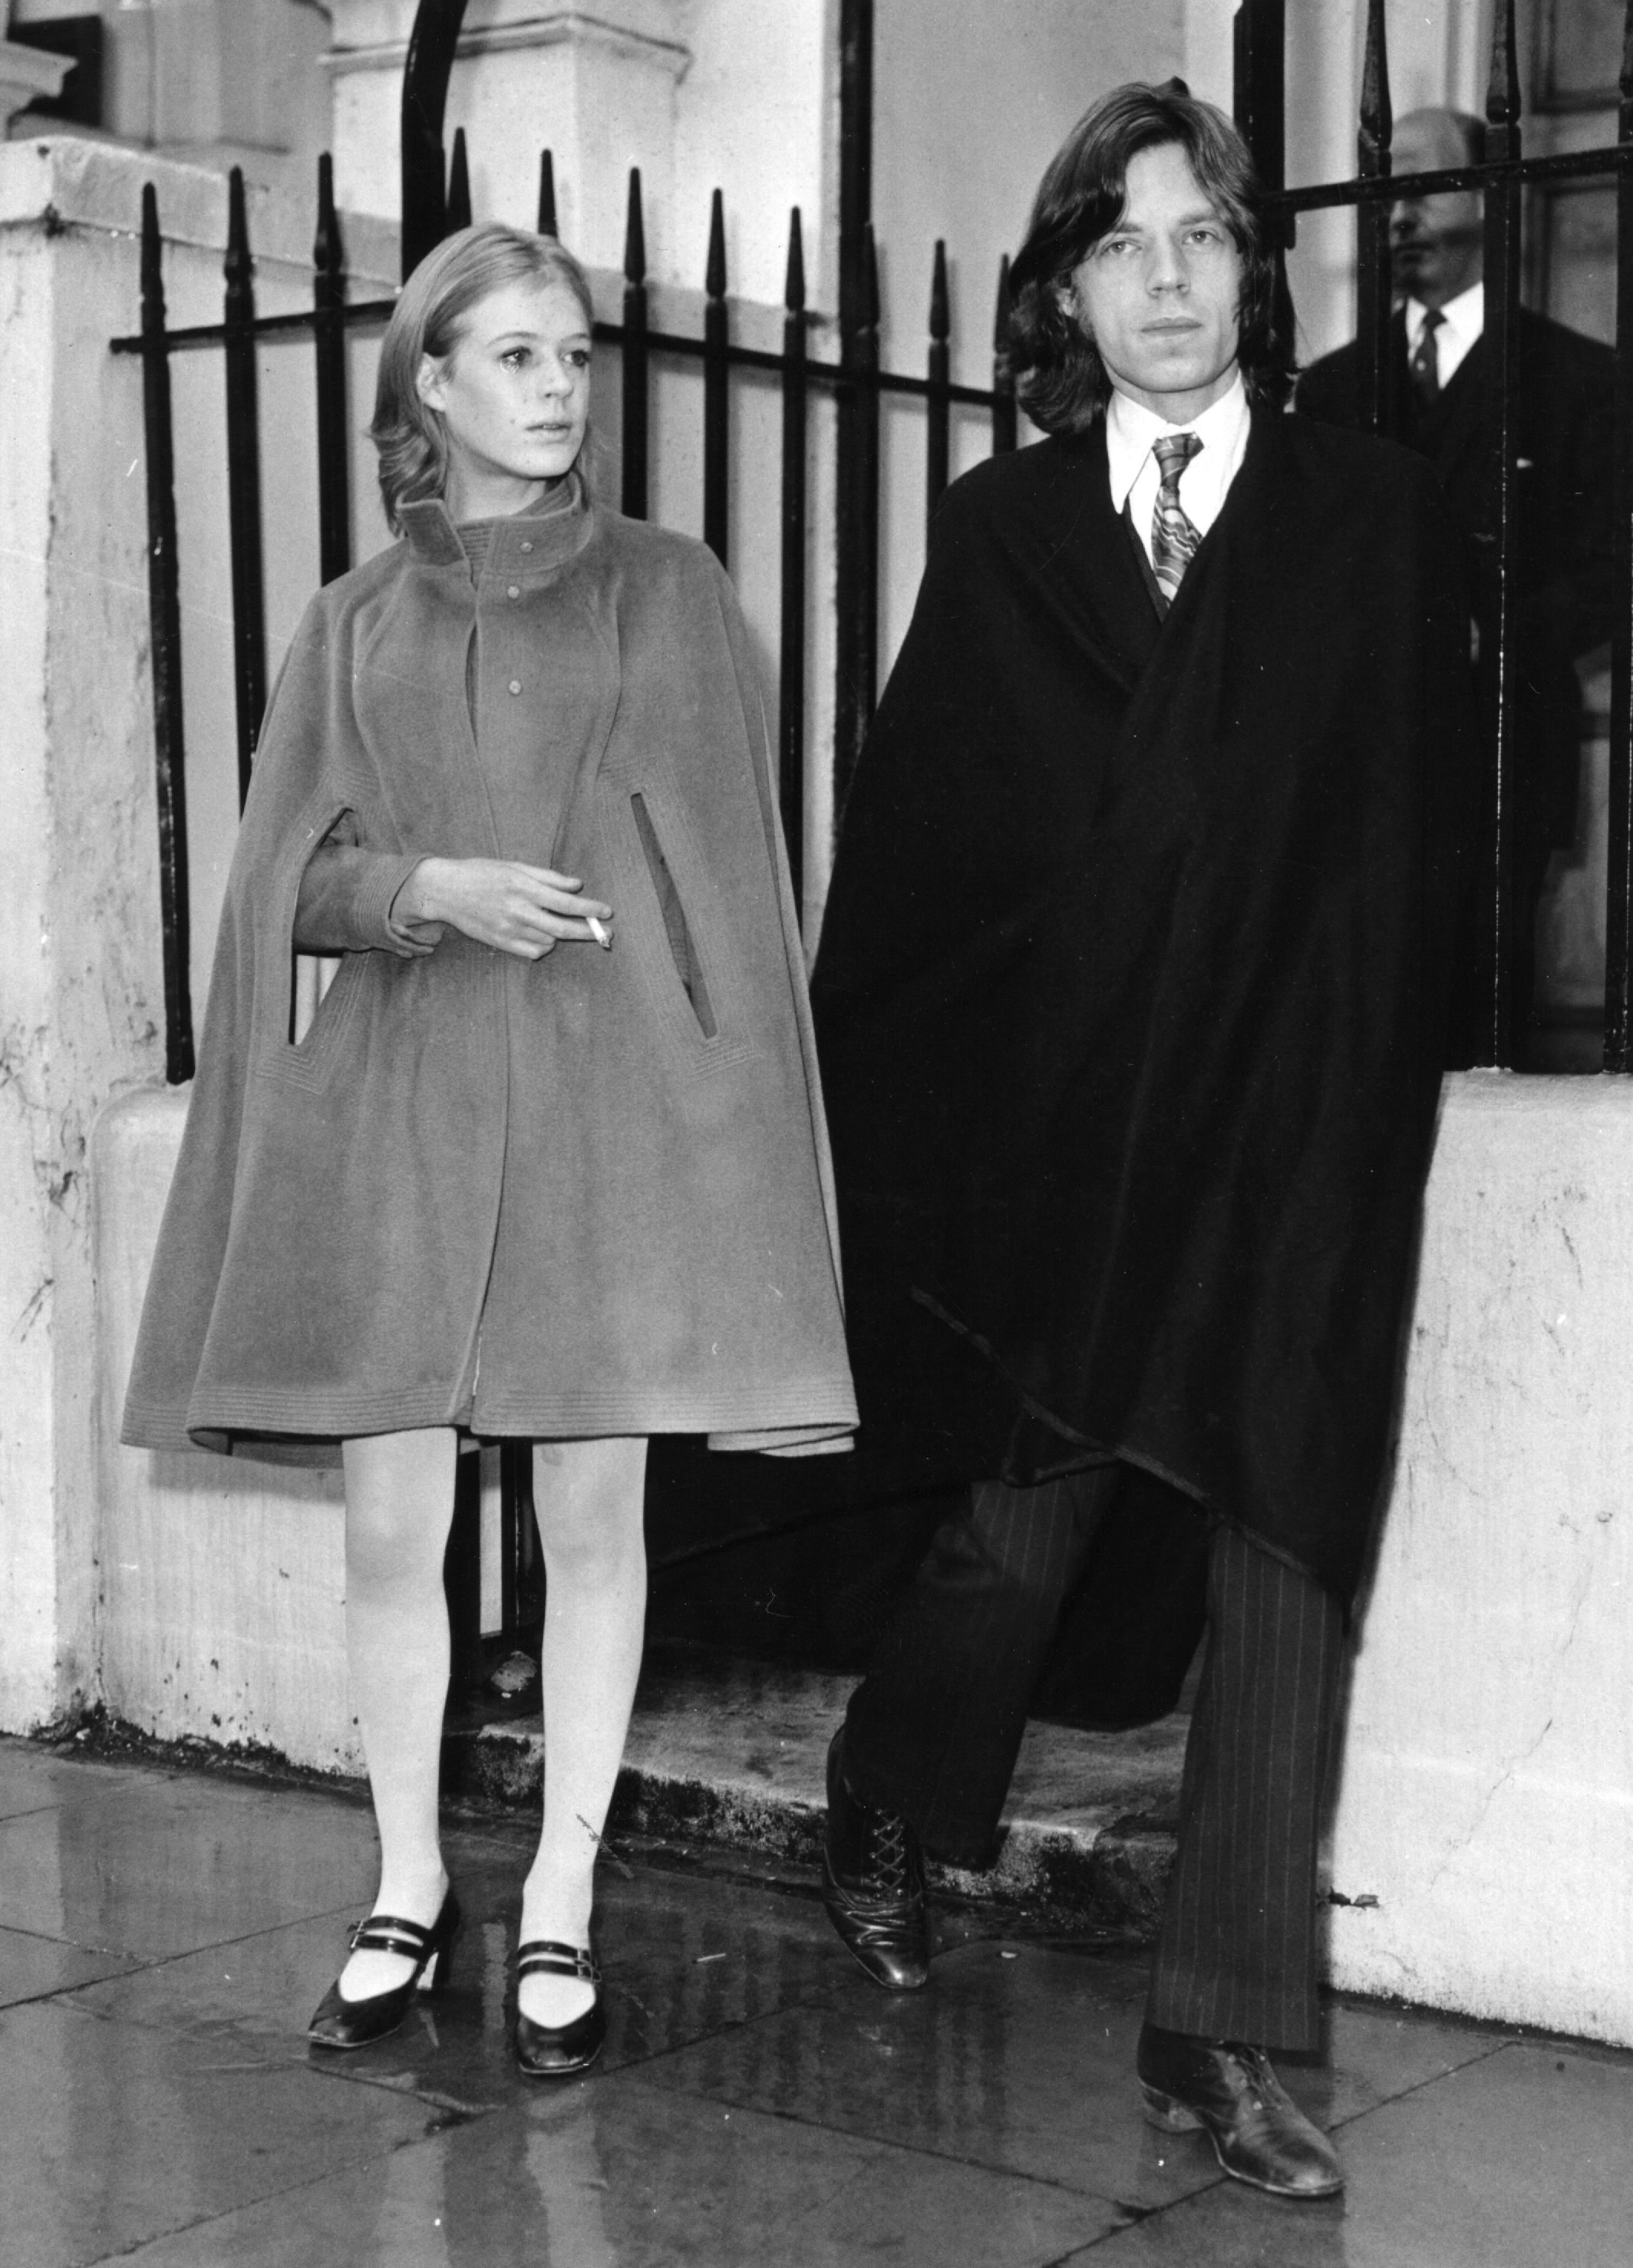 mick jagger and marianne faithfull walking on the sidewalk outside a courthouse in 1969